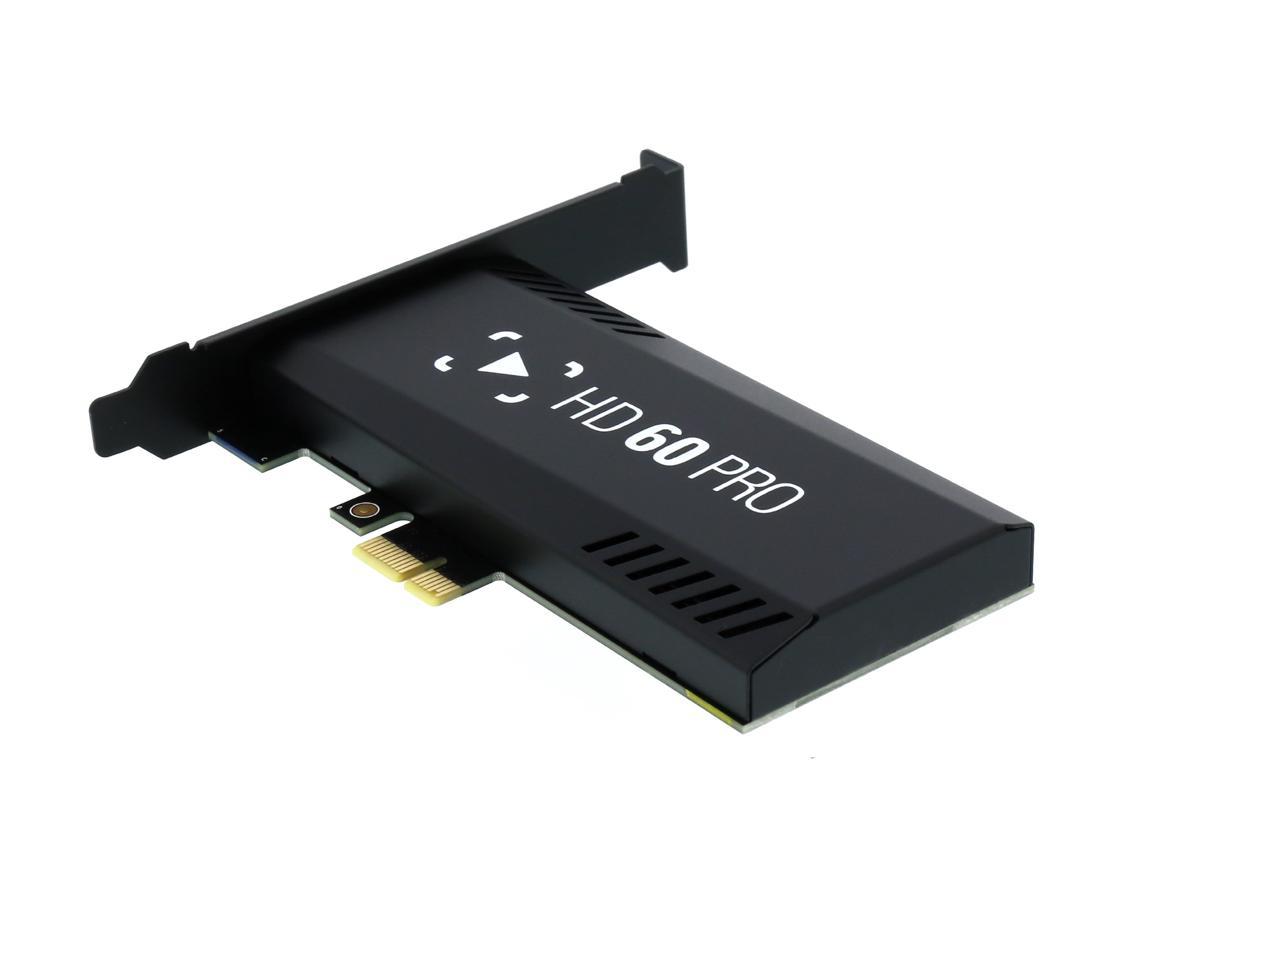 Elgato Game Capture Hd60 Pro Pcie Capture Card Stream And Record In 1080p 60 Fps